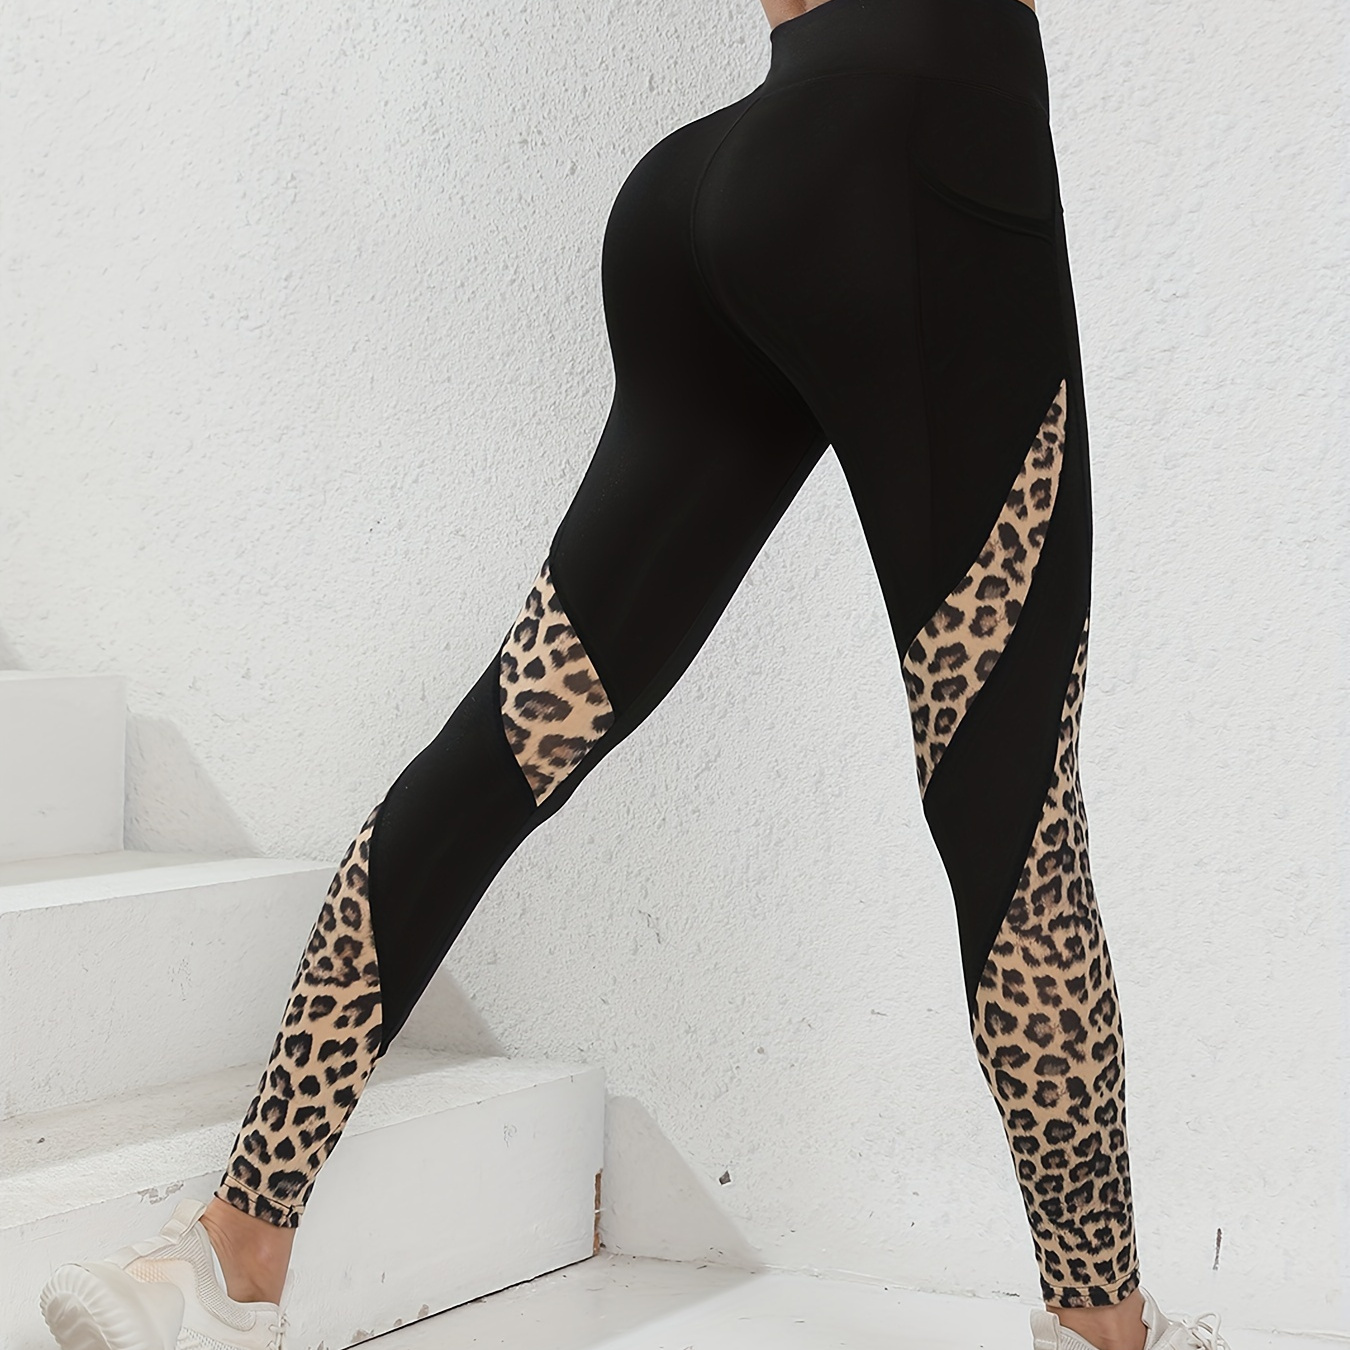 

Two-tone Mesh Panel Leopard Print High Waist Women's Yoga Leggings With Pockets, Stretch, Machine Washable, Non-transparent, All-season Sports Pants For Women